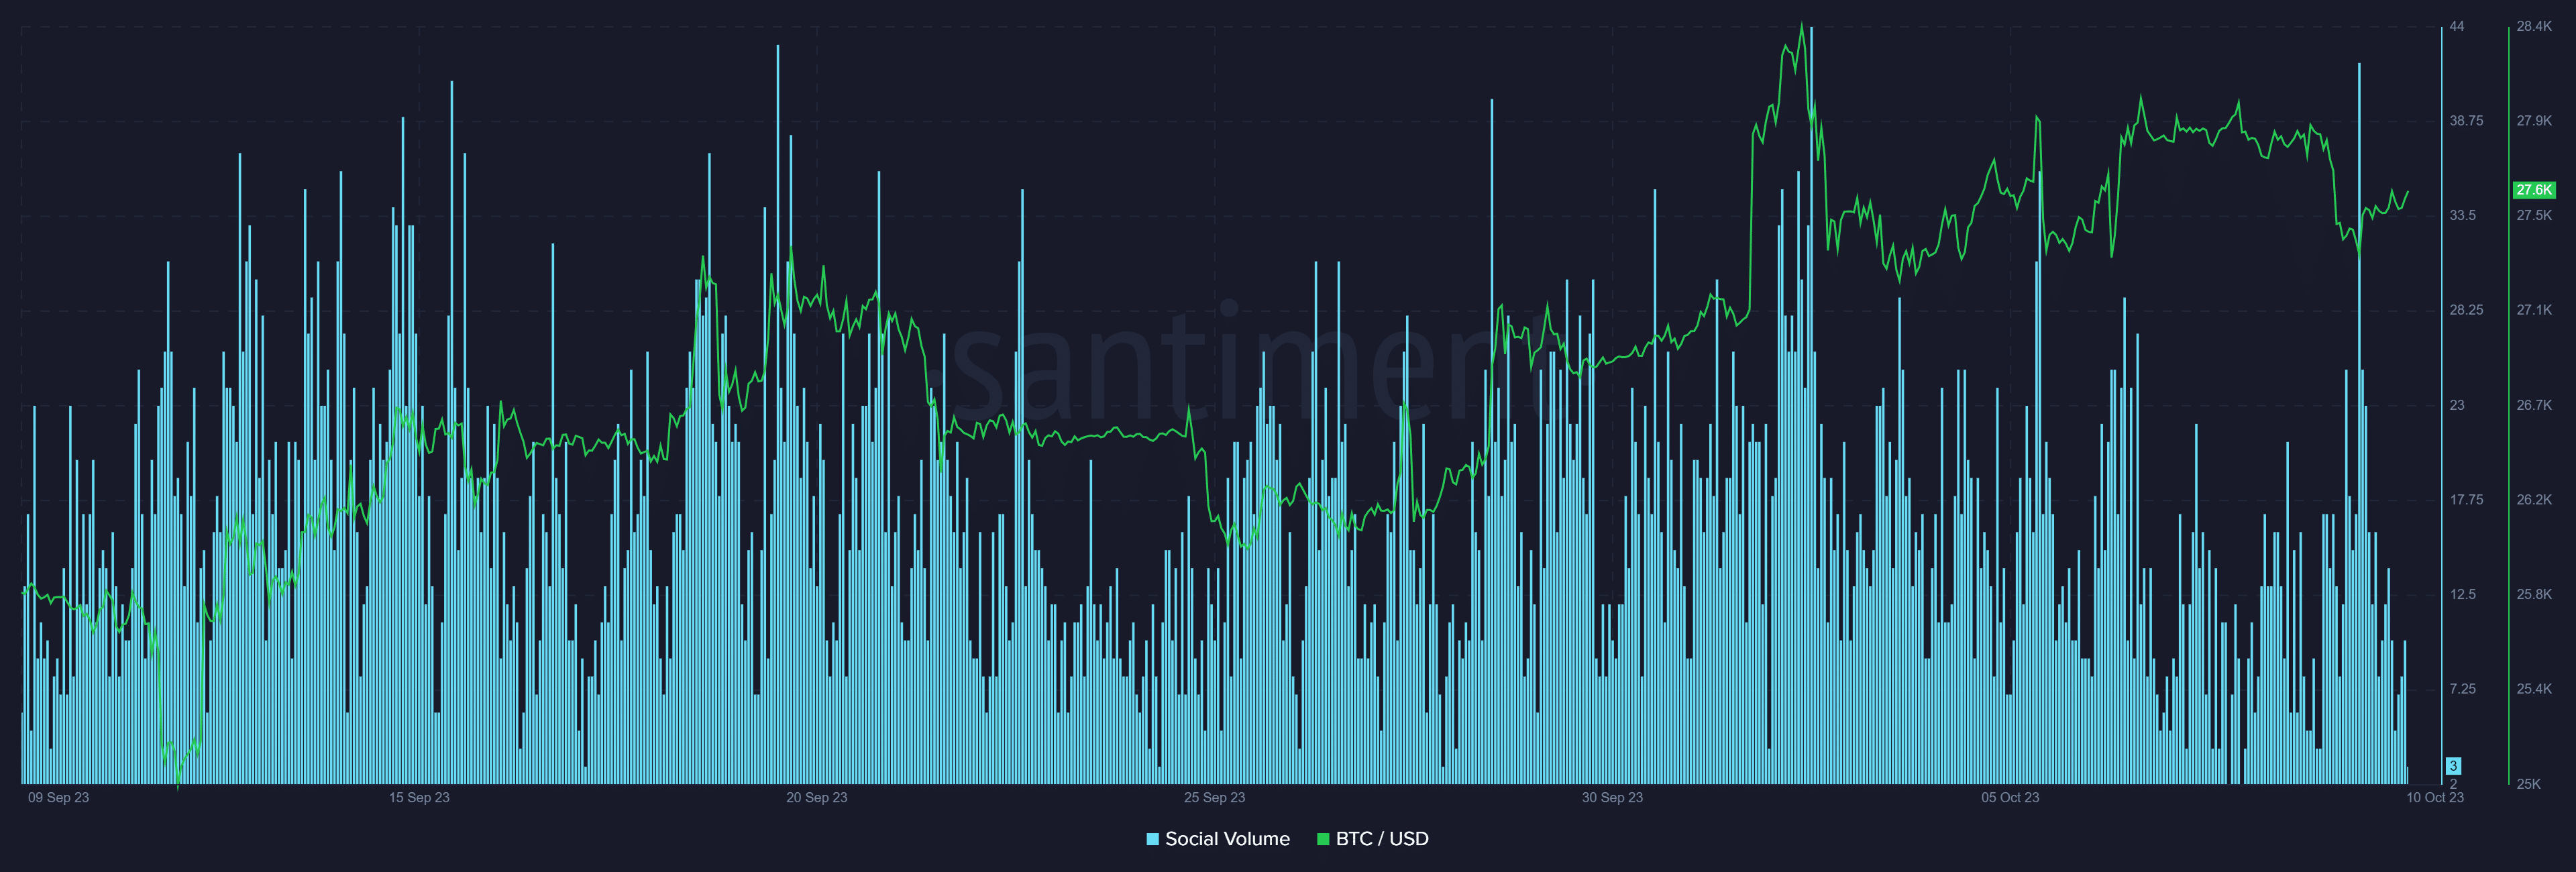 Bullish crypto sentiment drops with the marketwide plunge - 1